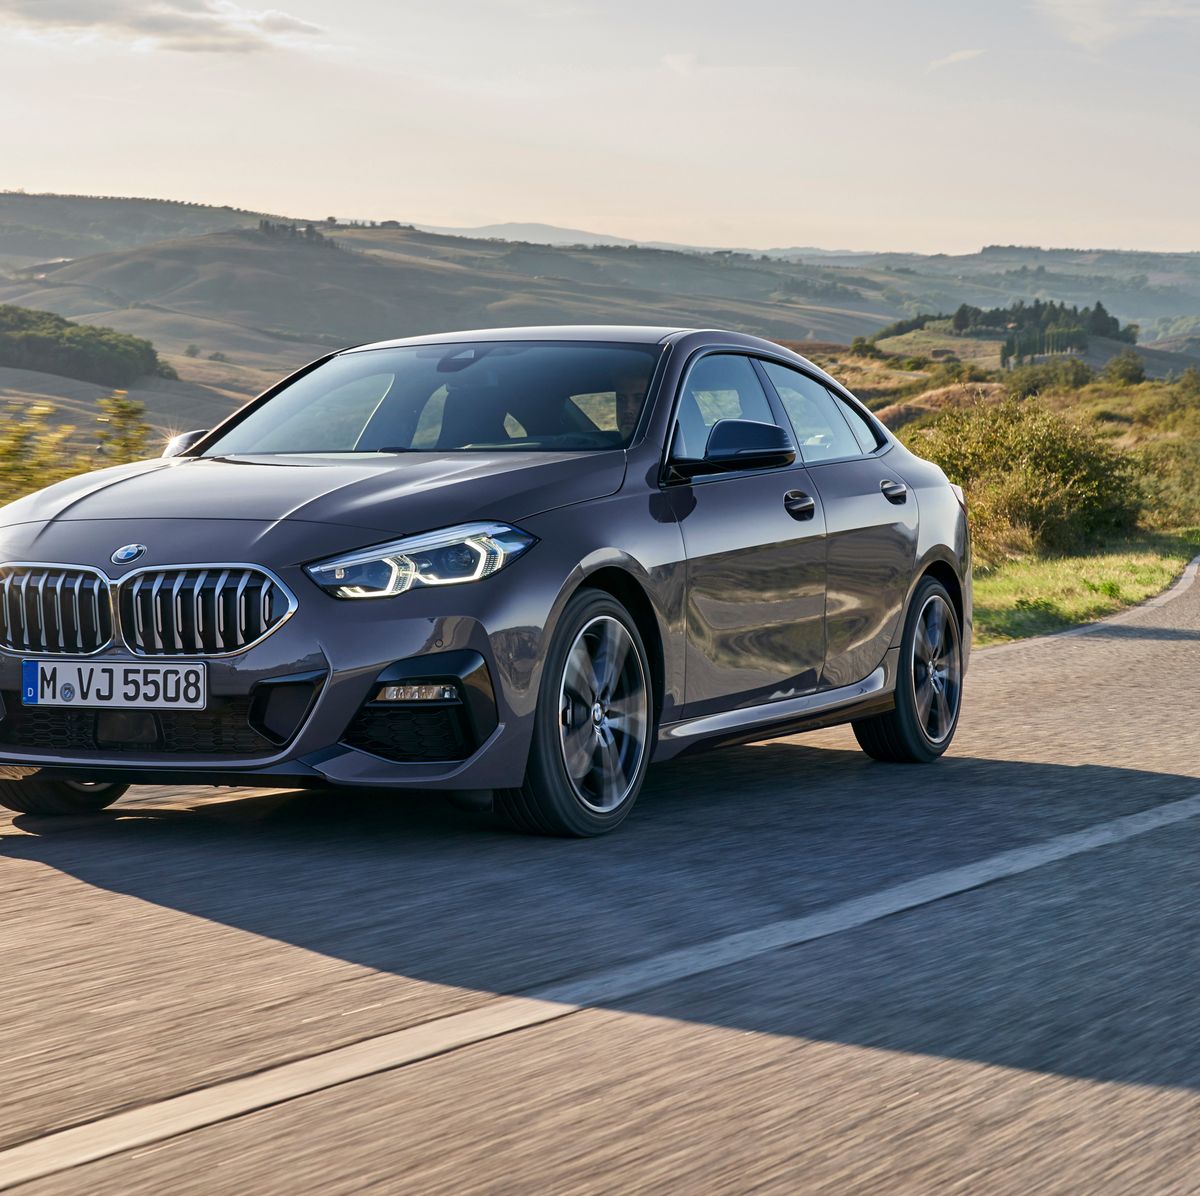 The BMW 228i xDrive Gran Coupe Is Not What I Was Expecting